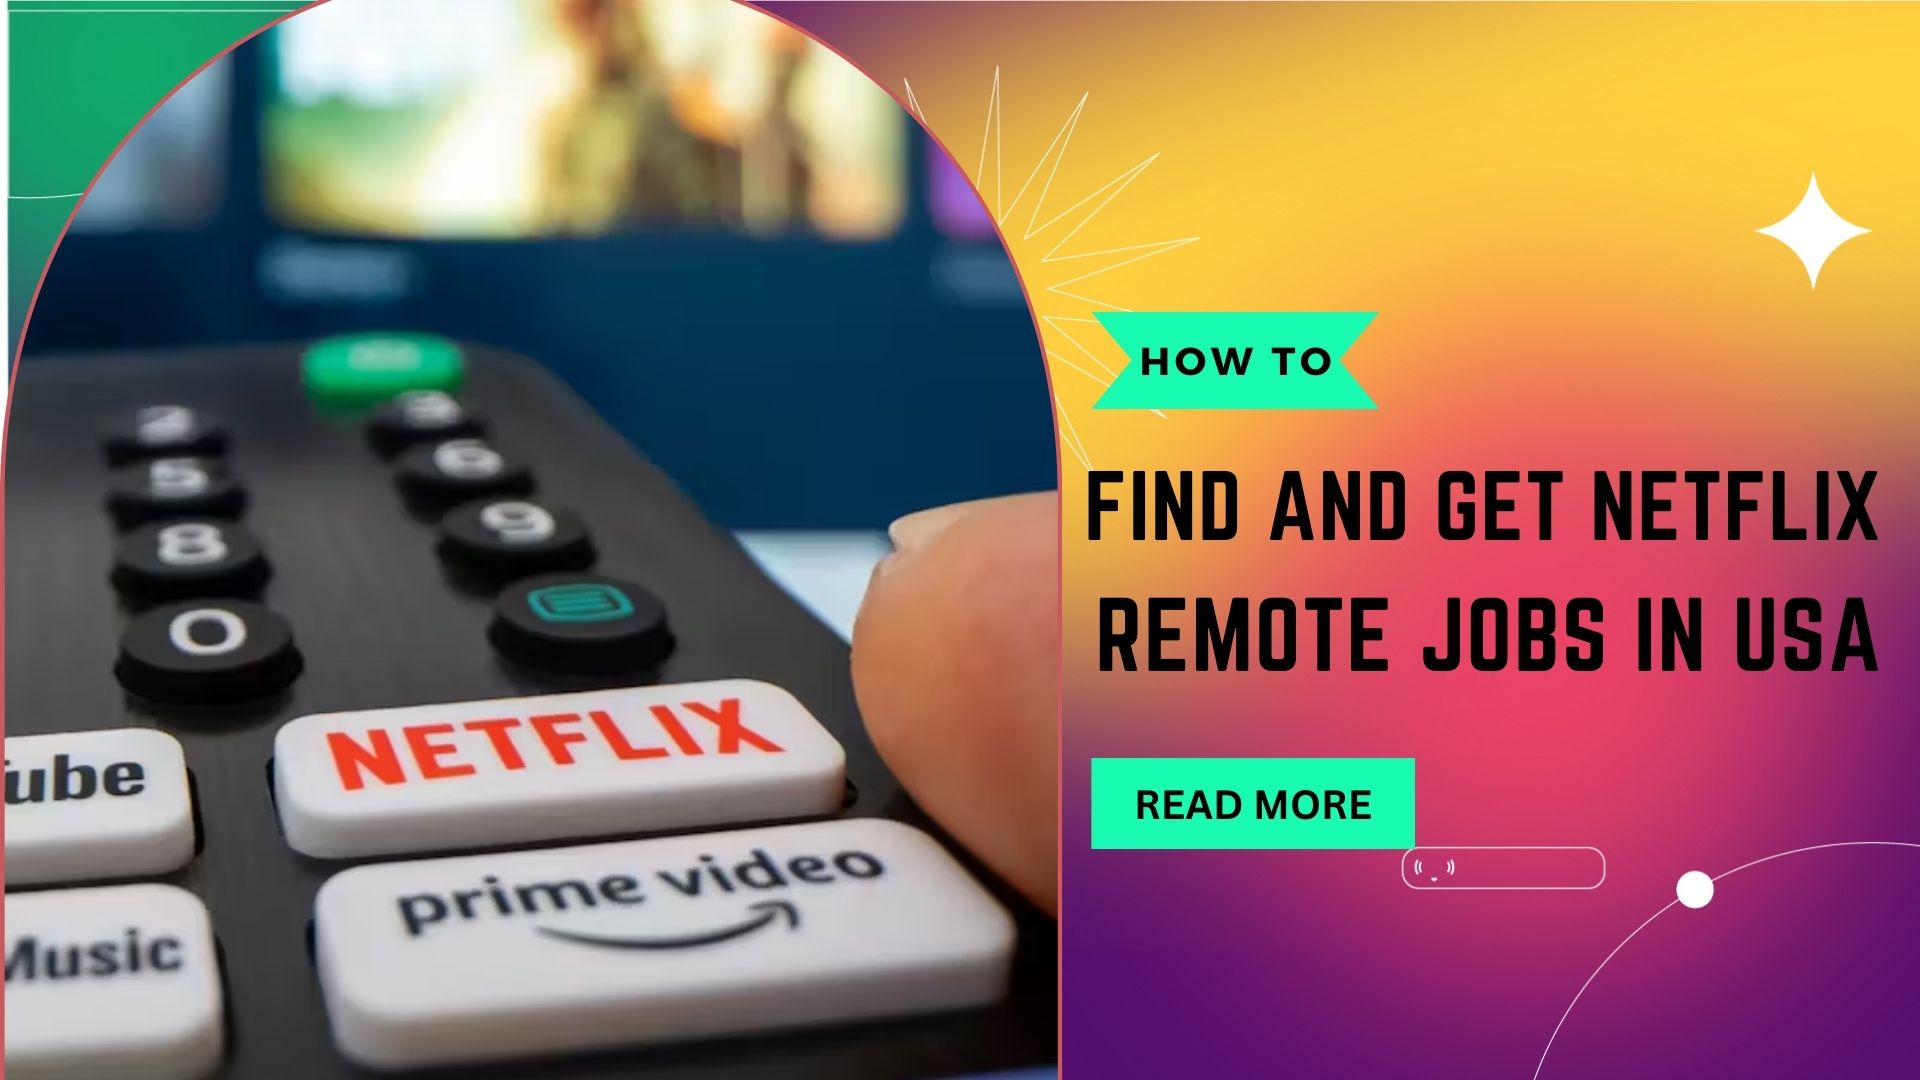 How to Find and Get Netflix Remote Jobs in USA